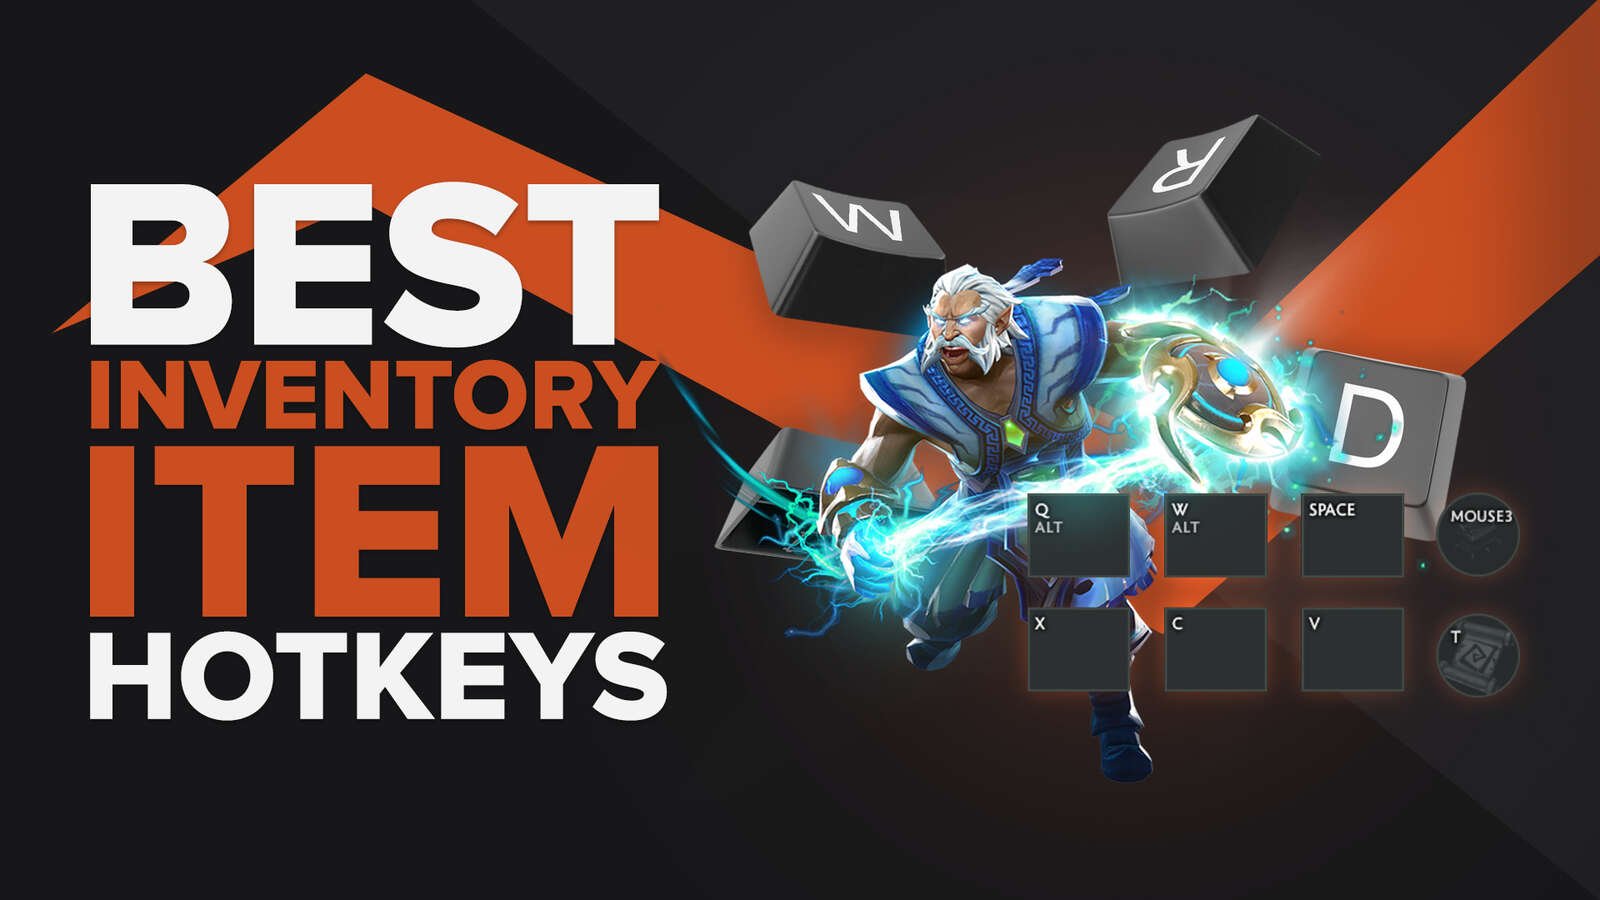 How to Set Up The Best Inventory Item Hotkeys